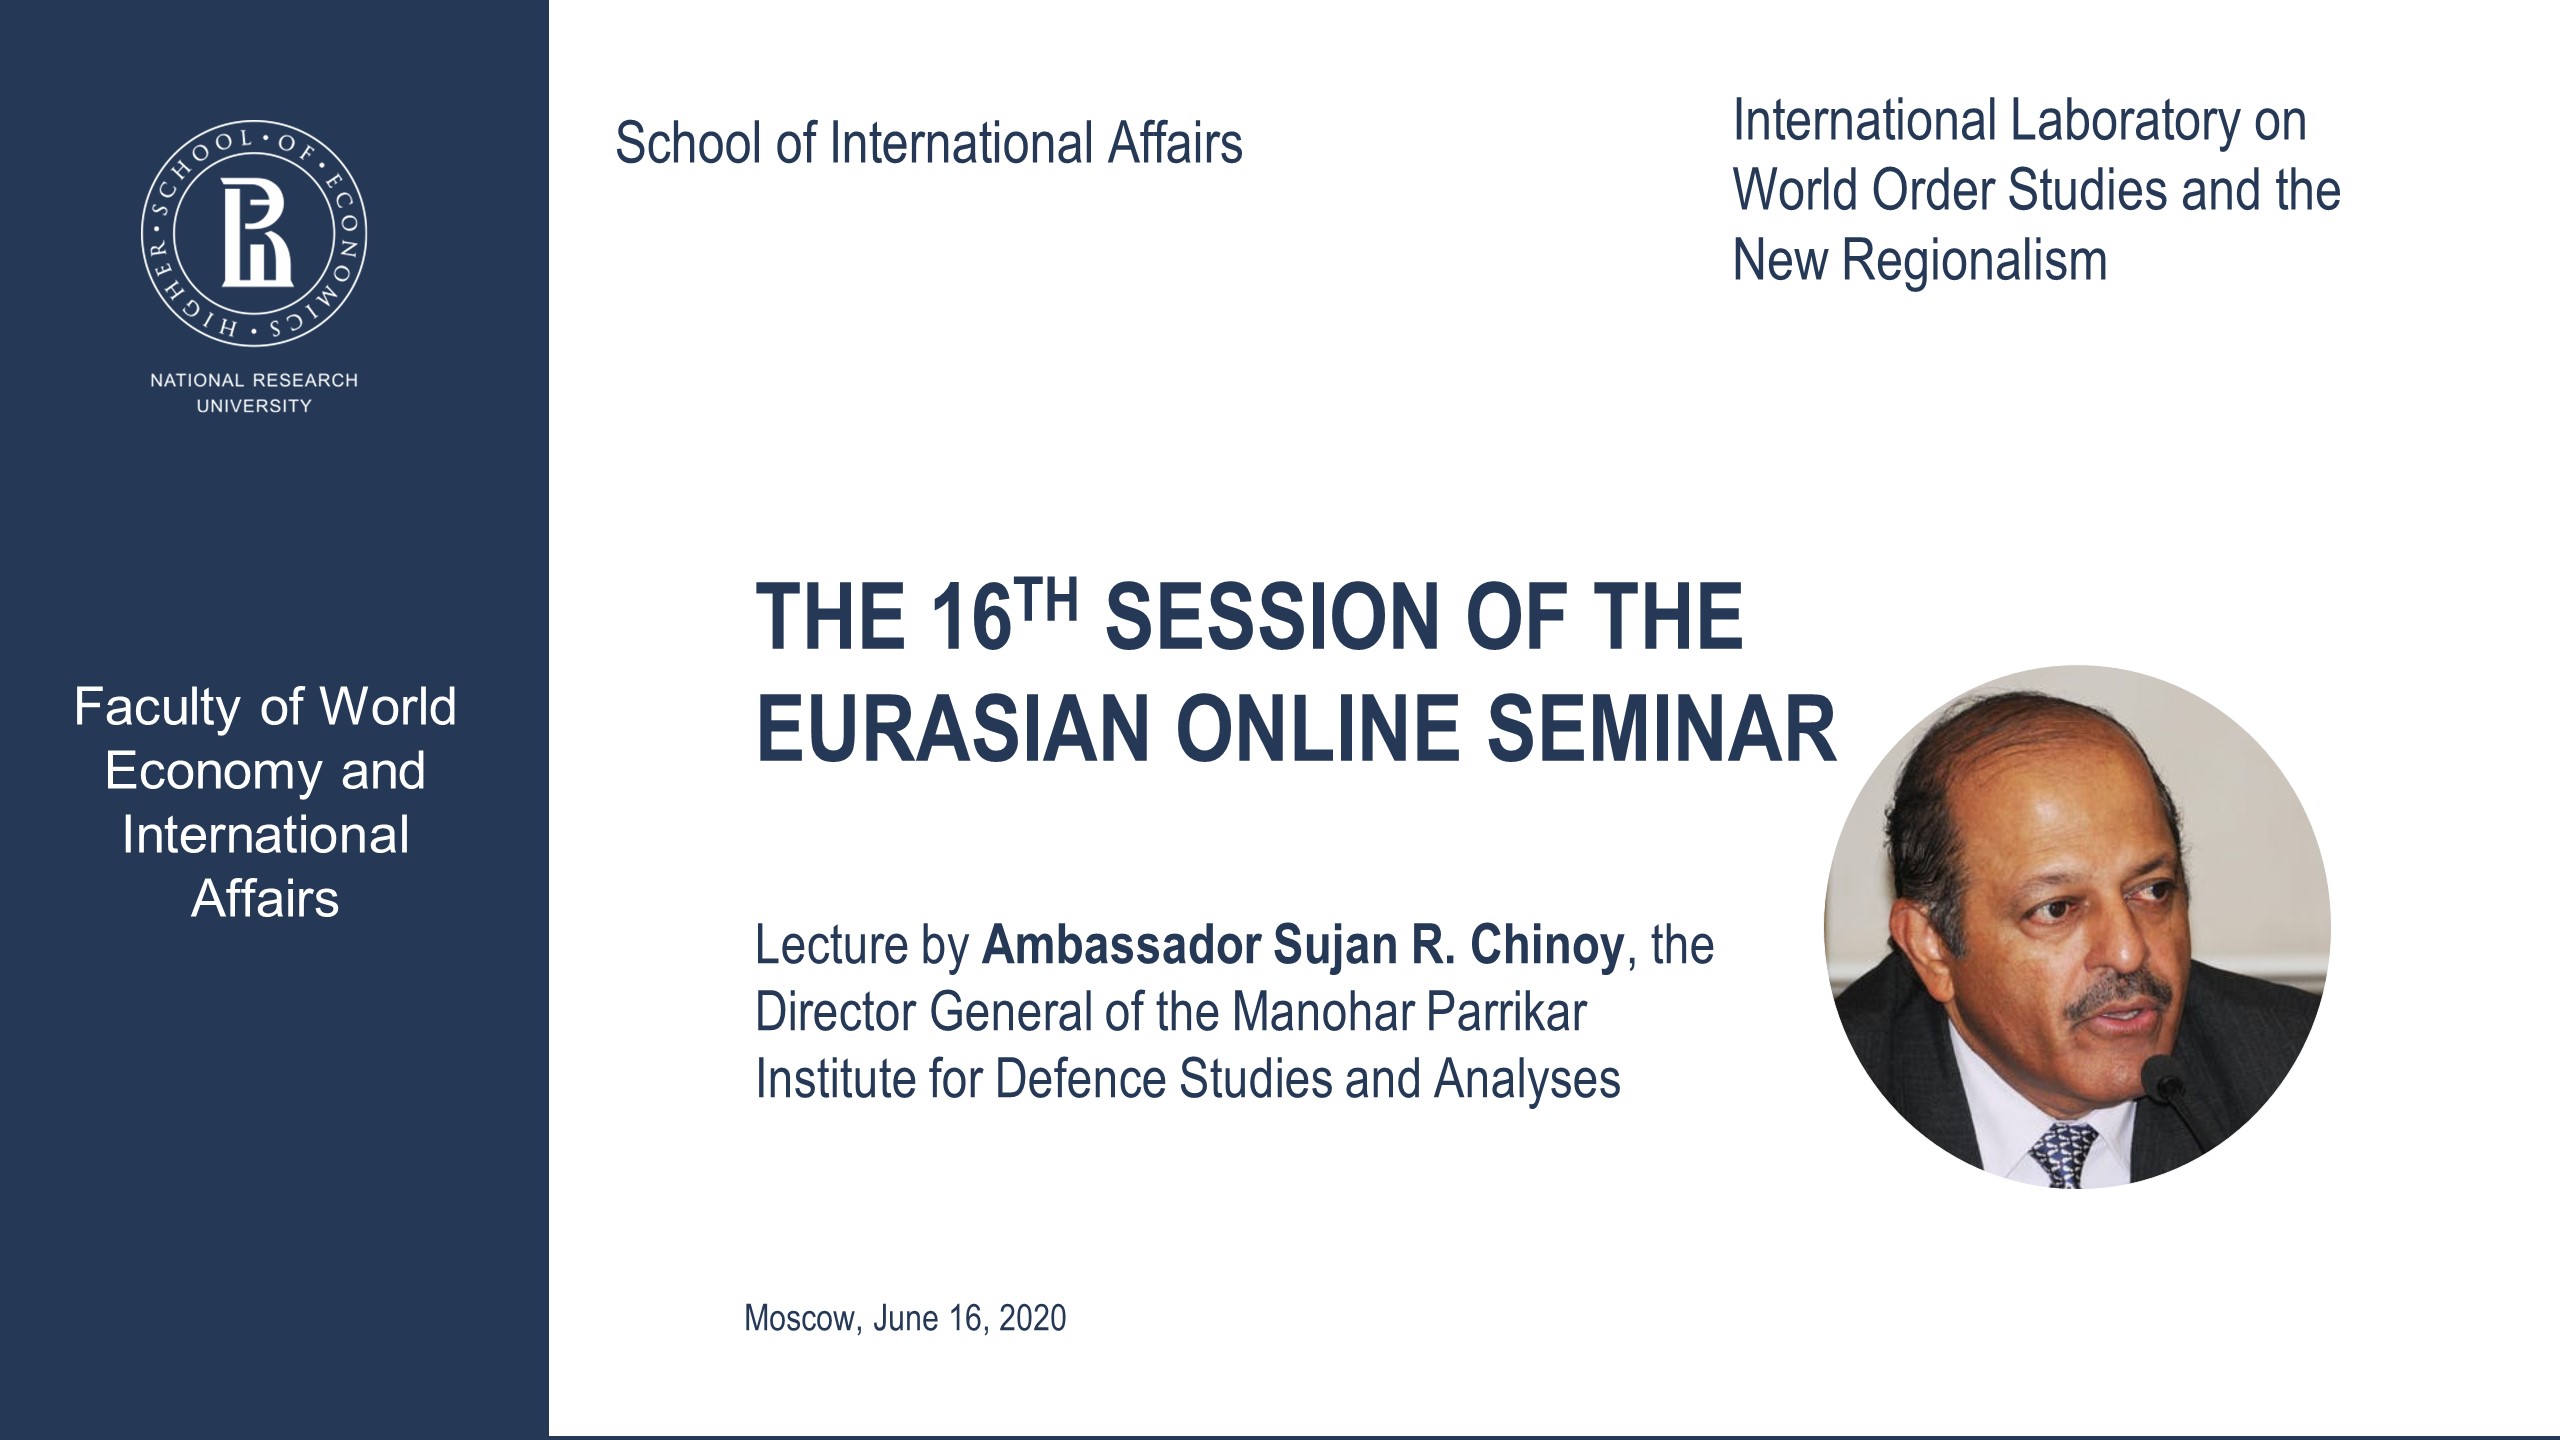 The 16th Session of Eurasian Online Seminar with Ambassador Sujan R. Chinoy